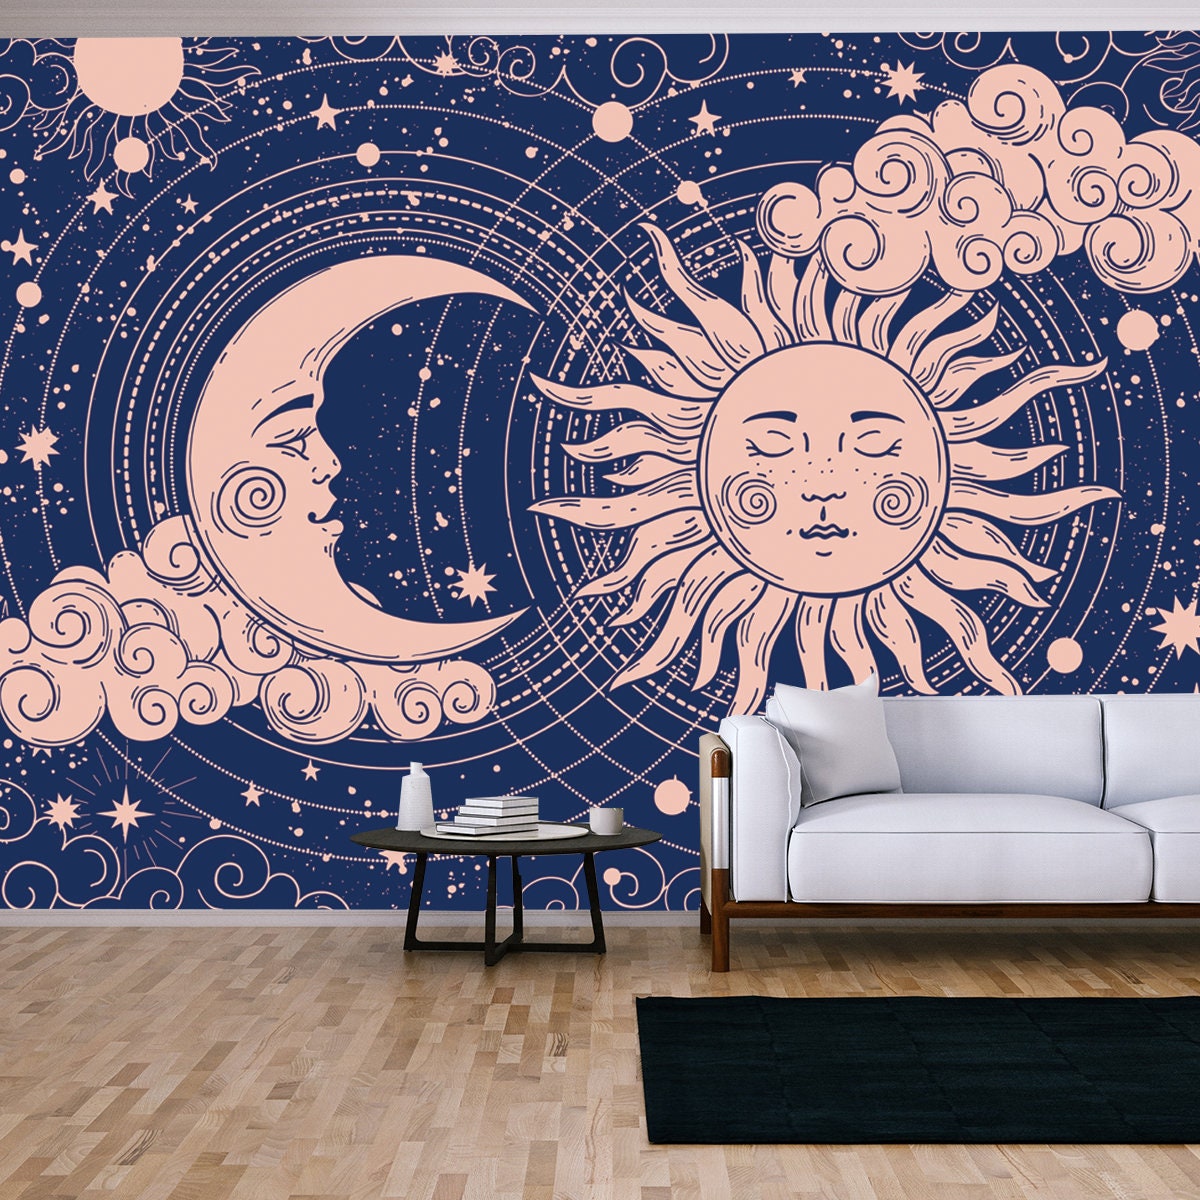 Banner for Astrology, Divination, Magic. The Device of the Universe, Crescent Moon and Sun with Moon on a Blue Wallpaper Living Room Mural